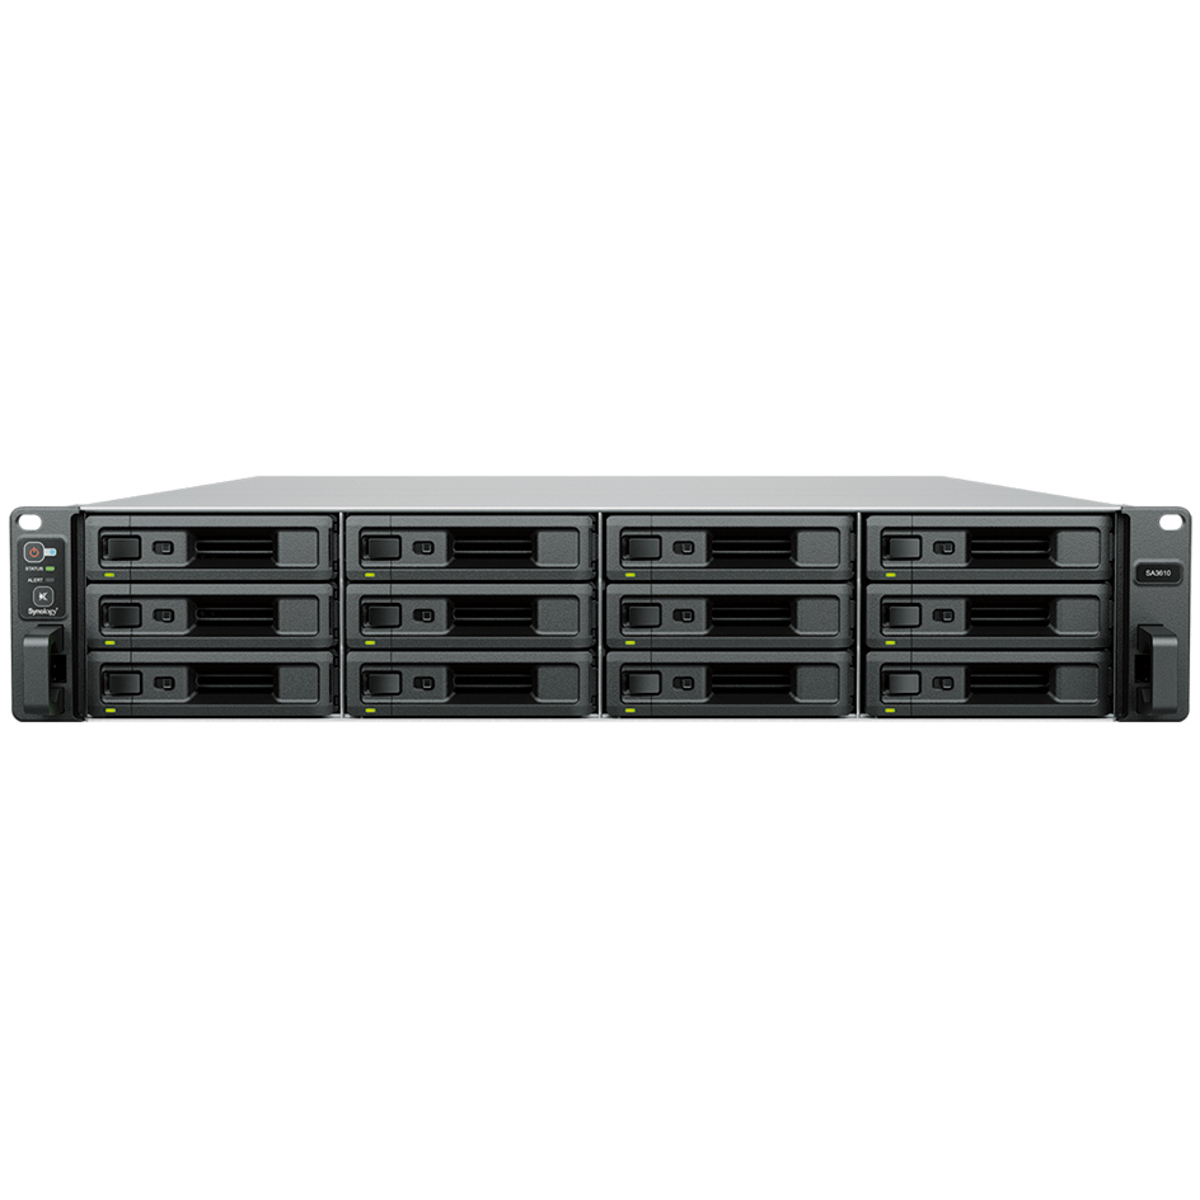 Synology RackStation SA3610 128tb 12-Bay RackMount Large Business / Enterprise NAS - Network Attached Storage Device 8x16tb Seagate IronWolf Pro ST16000NT001 3.5 7200rpm SATA 6Gb/s HDD NAS Class Drives Installed - Burn-In Tested - ON SALE RackStation SA3610